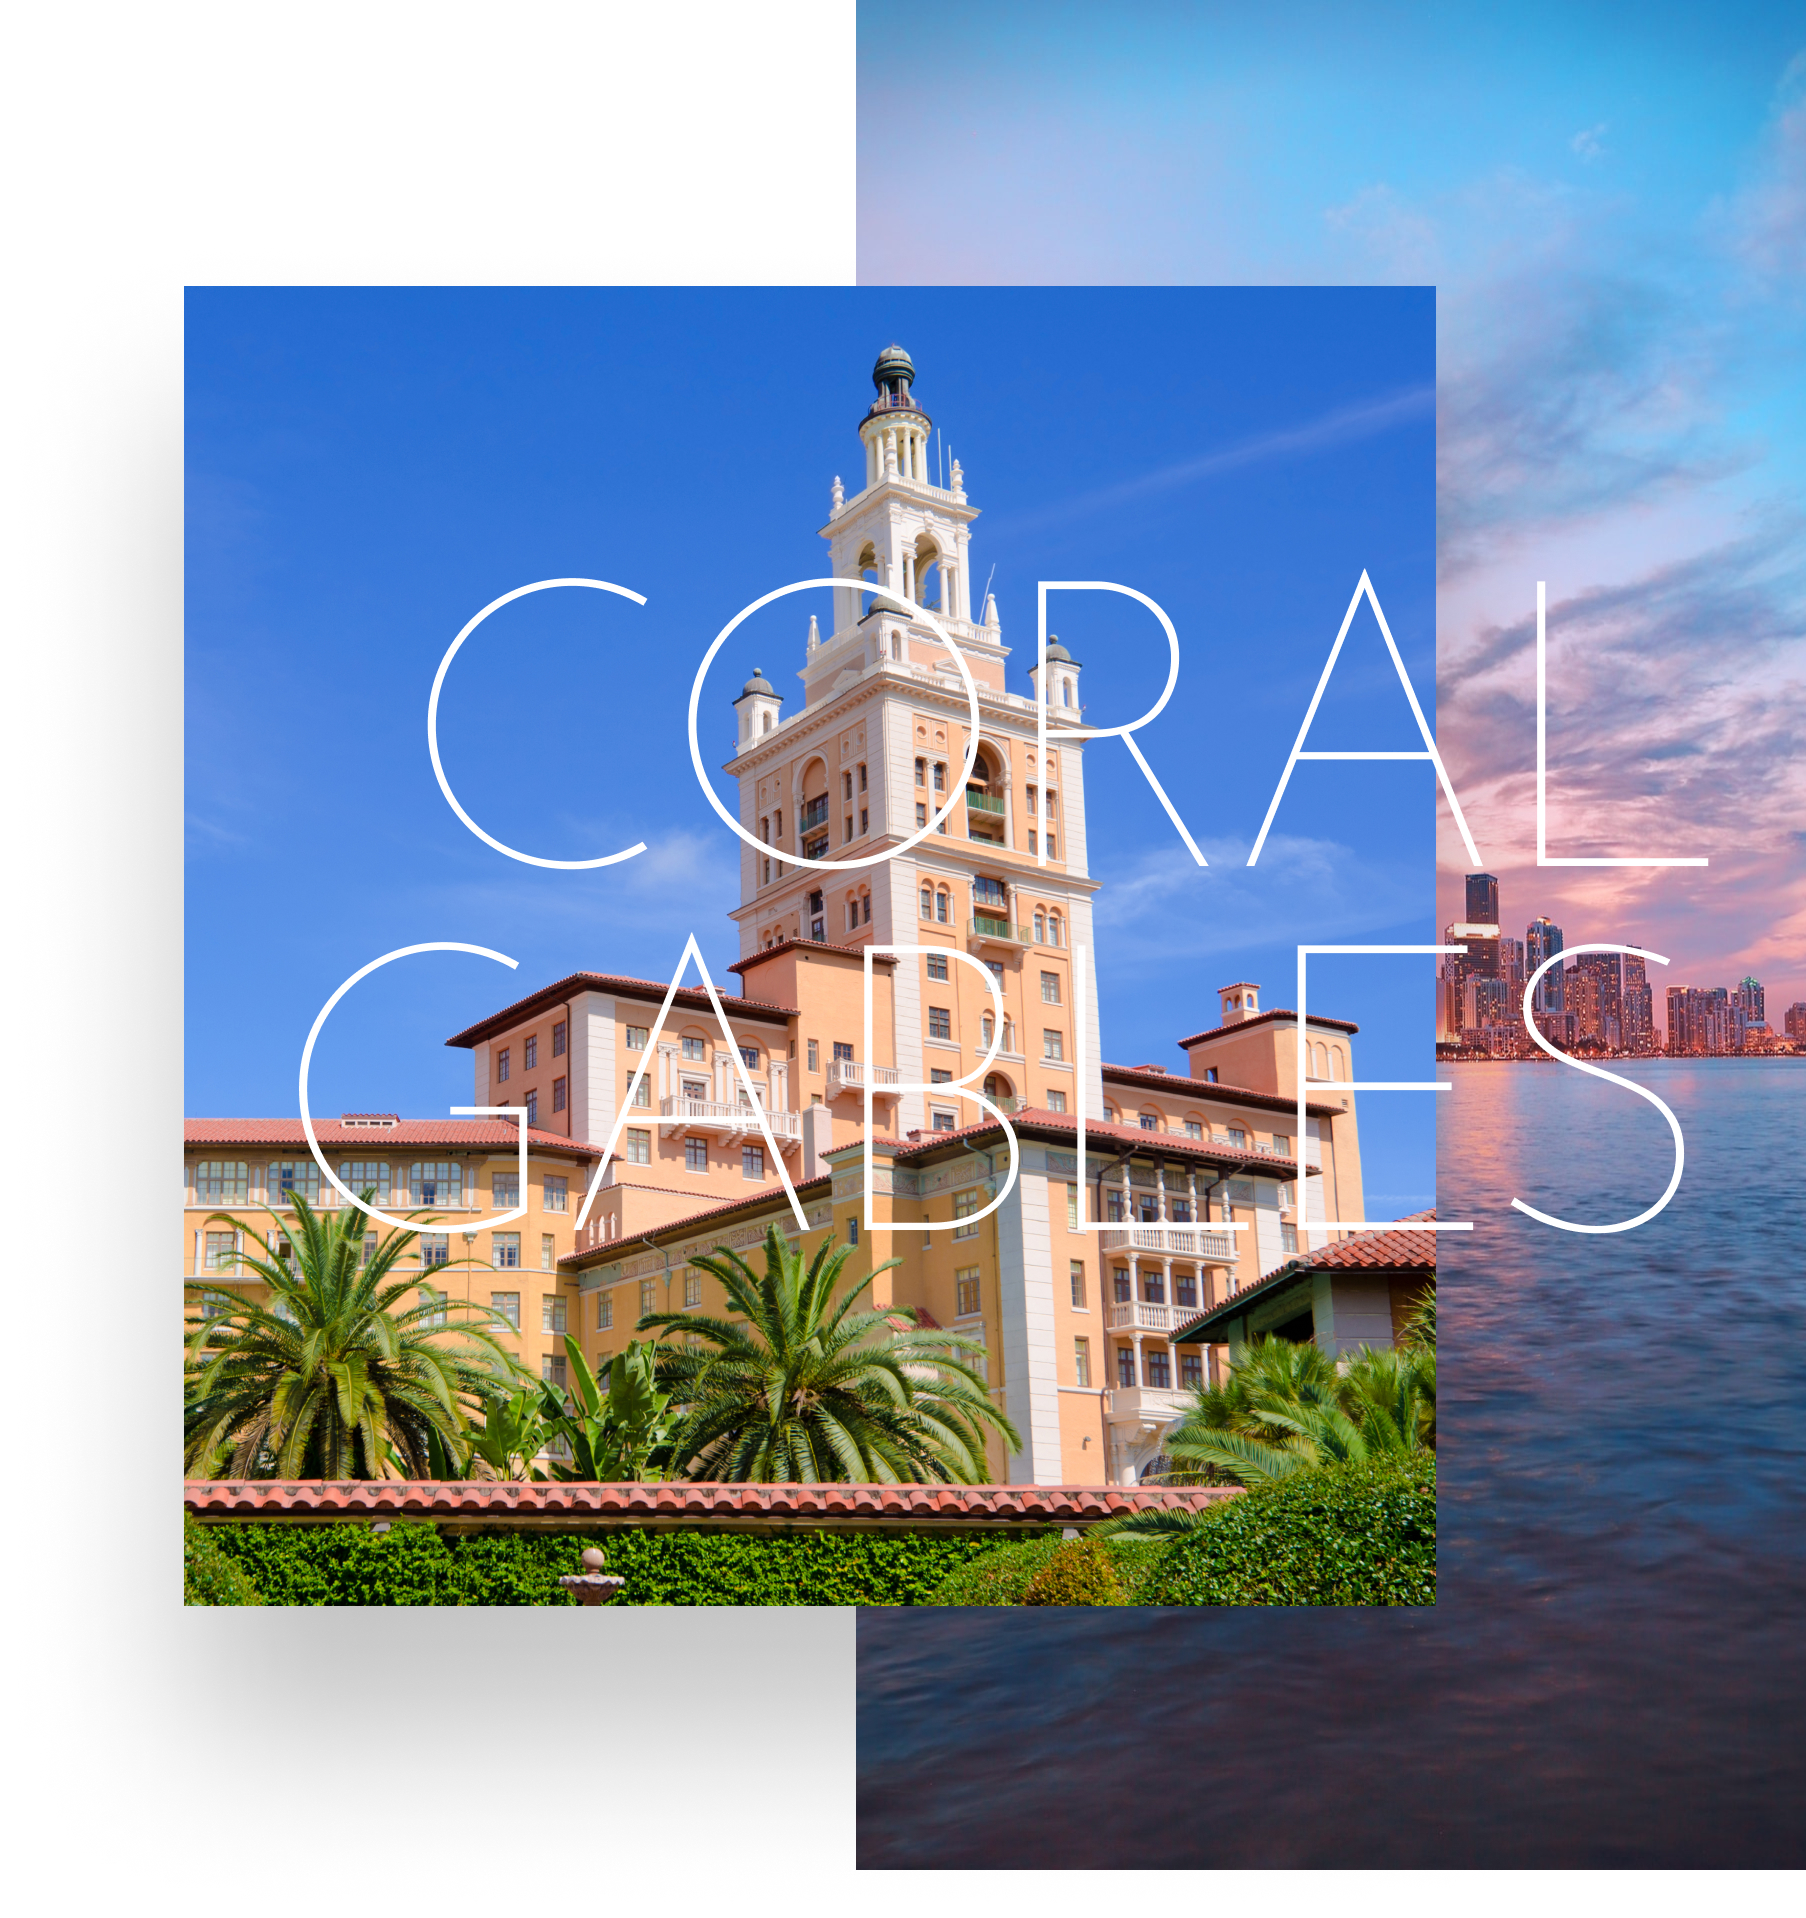 "CORAL GABLES" over an image of the Biltmore Hotel over an image of Miami at sunset from the water.